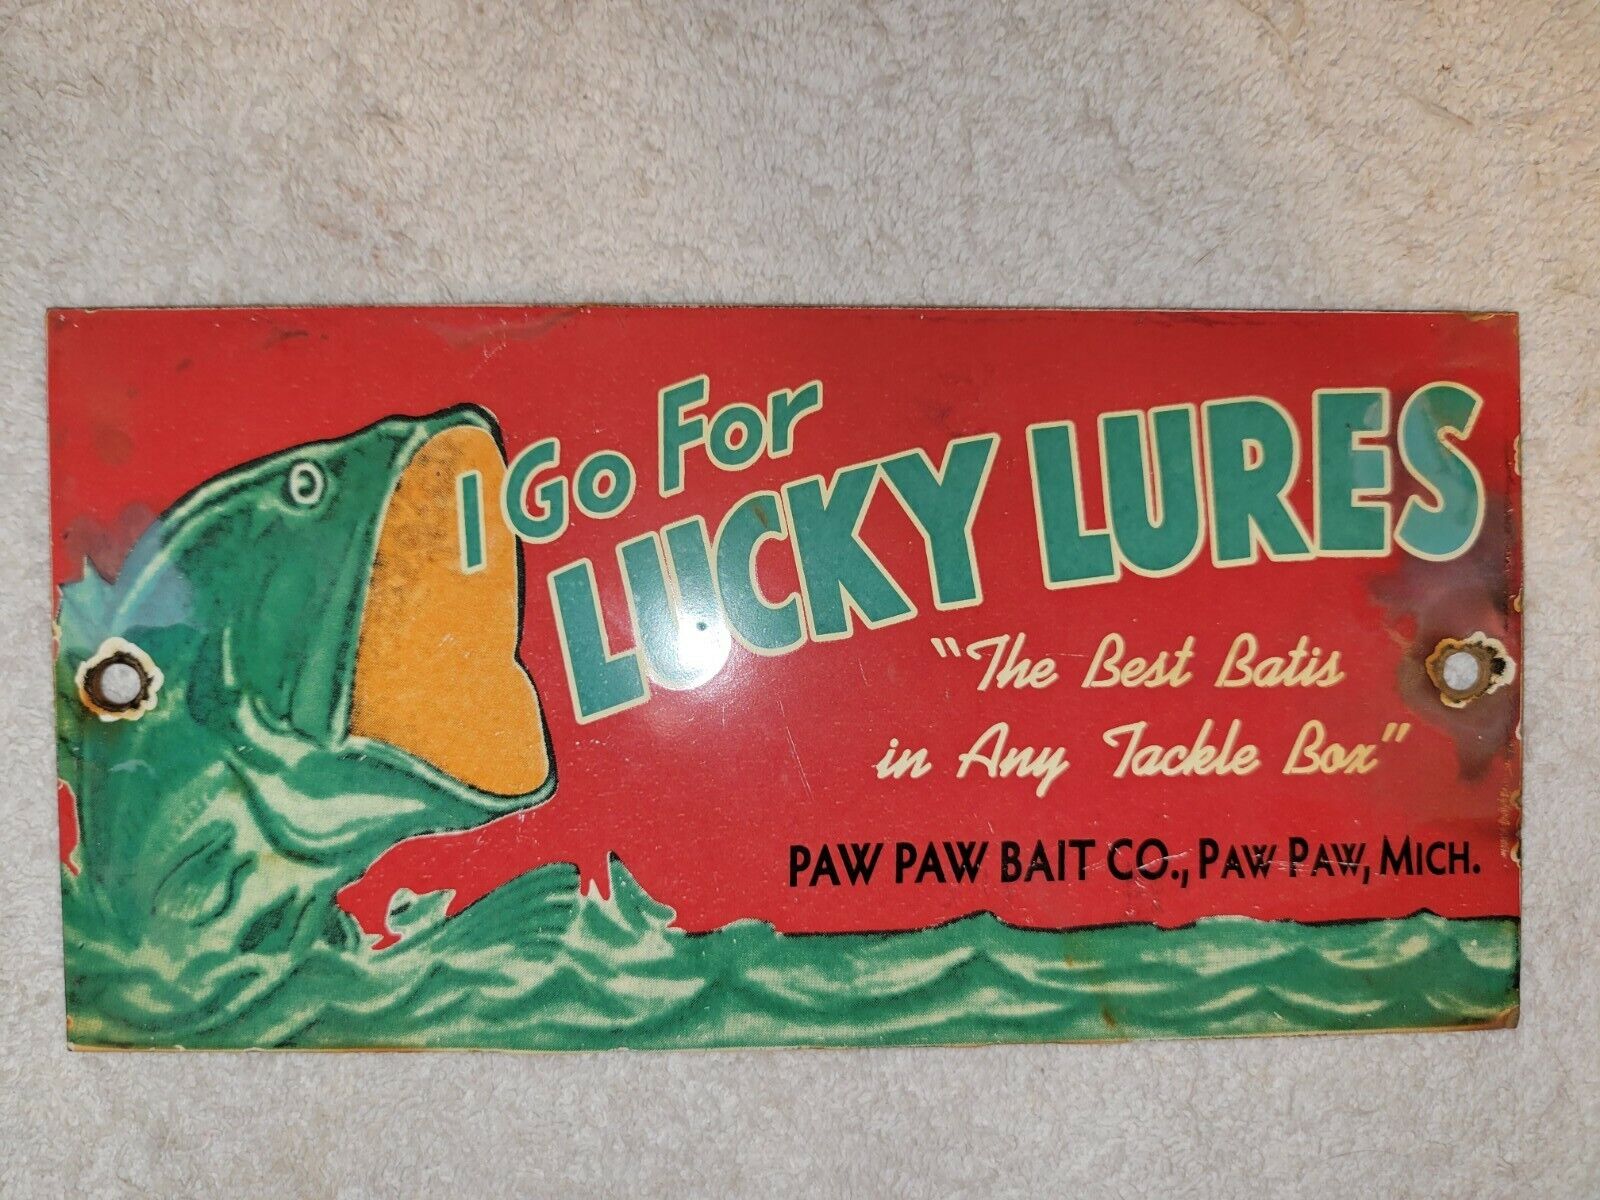 VINTAGE LUCKY LURES PORCELAIN SIGN PAW PAW BAIT COMPANY FISHING LURES CAMPING 